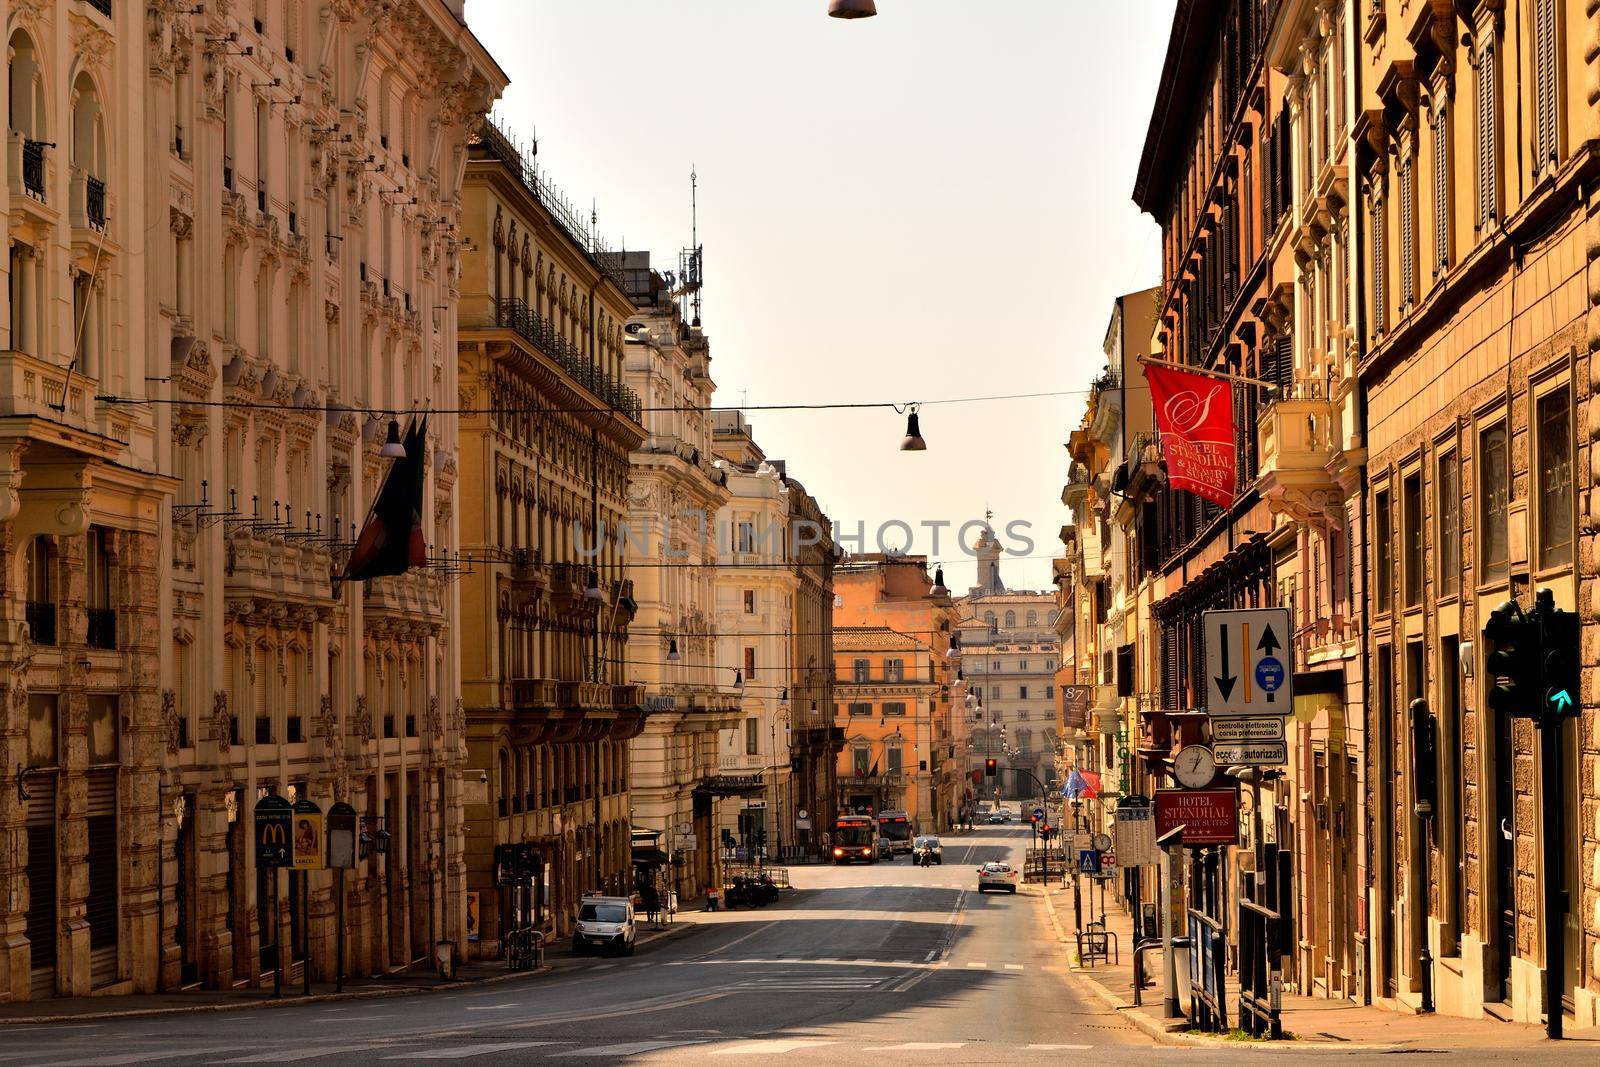 April 8th 2020, Rome, Italy: View of the Tritone street without tourists and traffic due to the lockdown